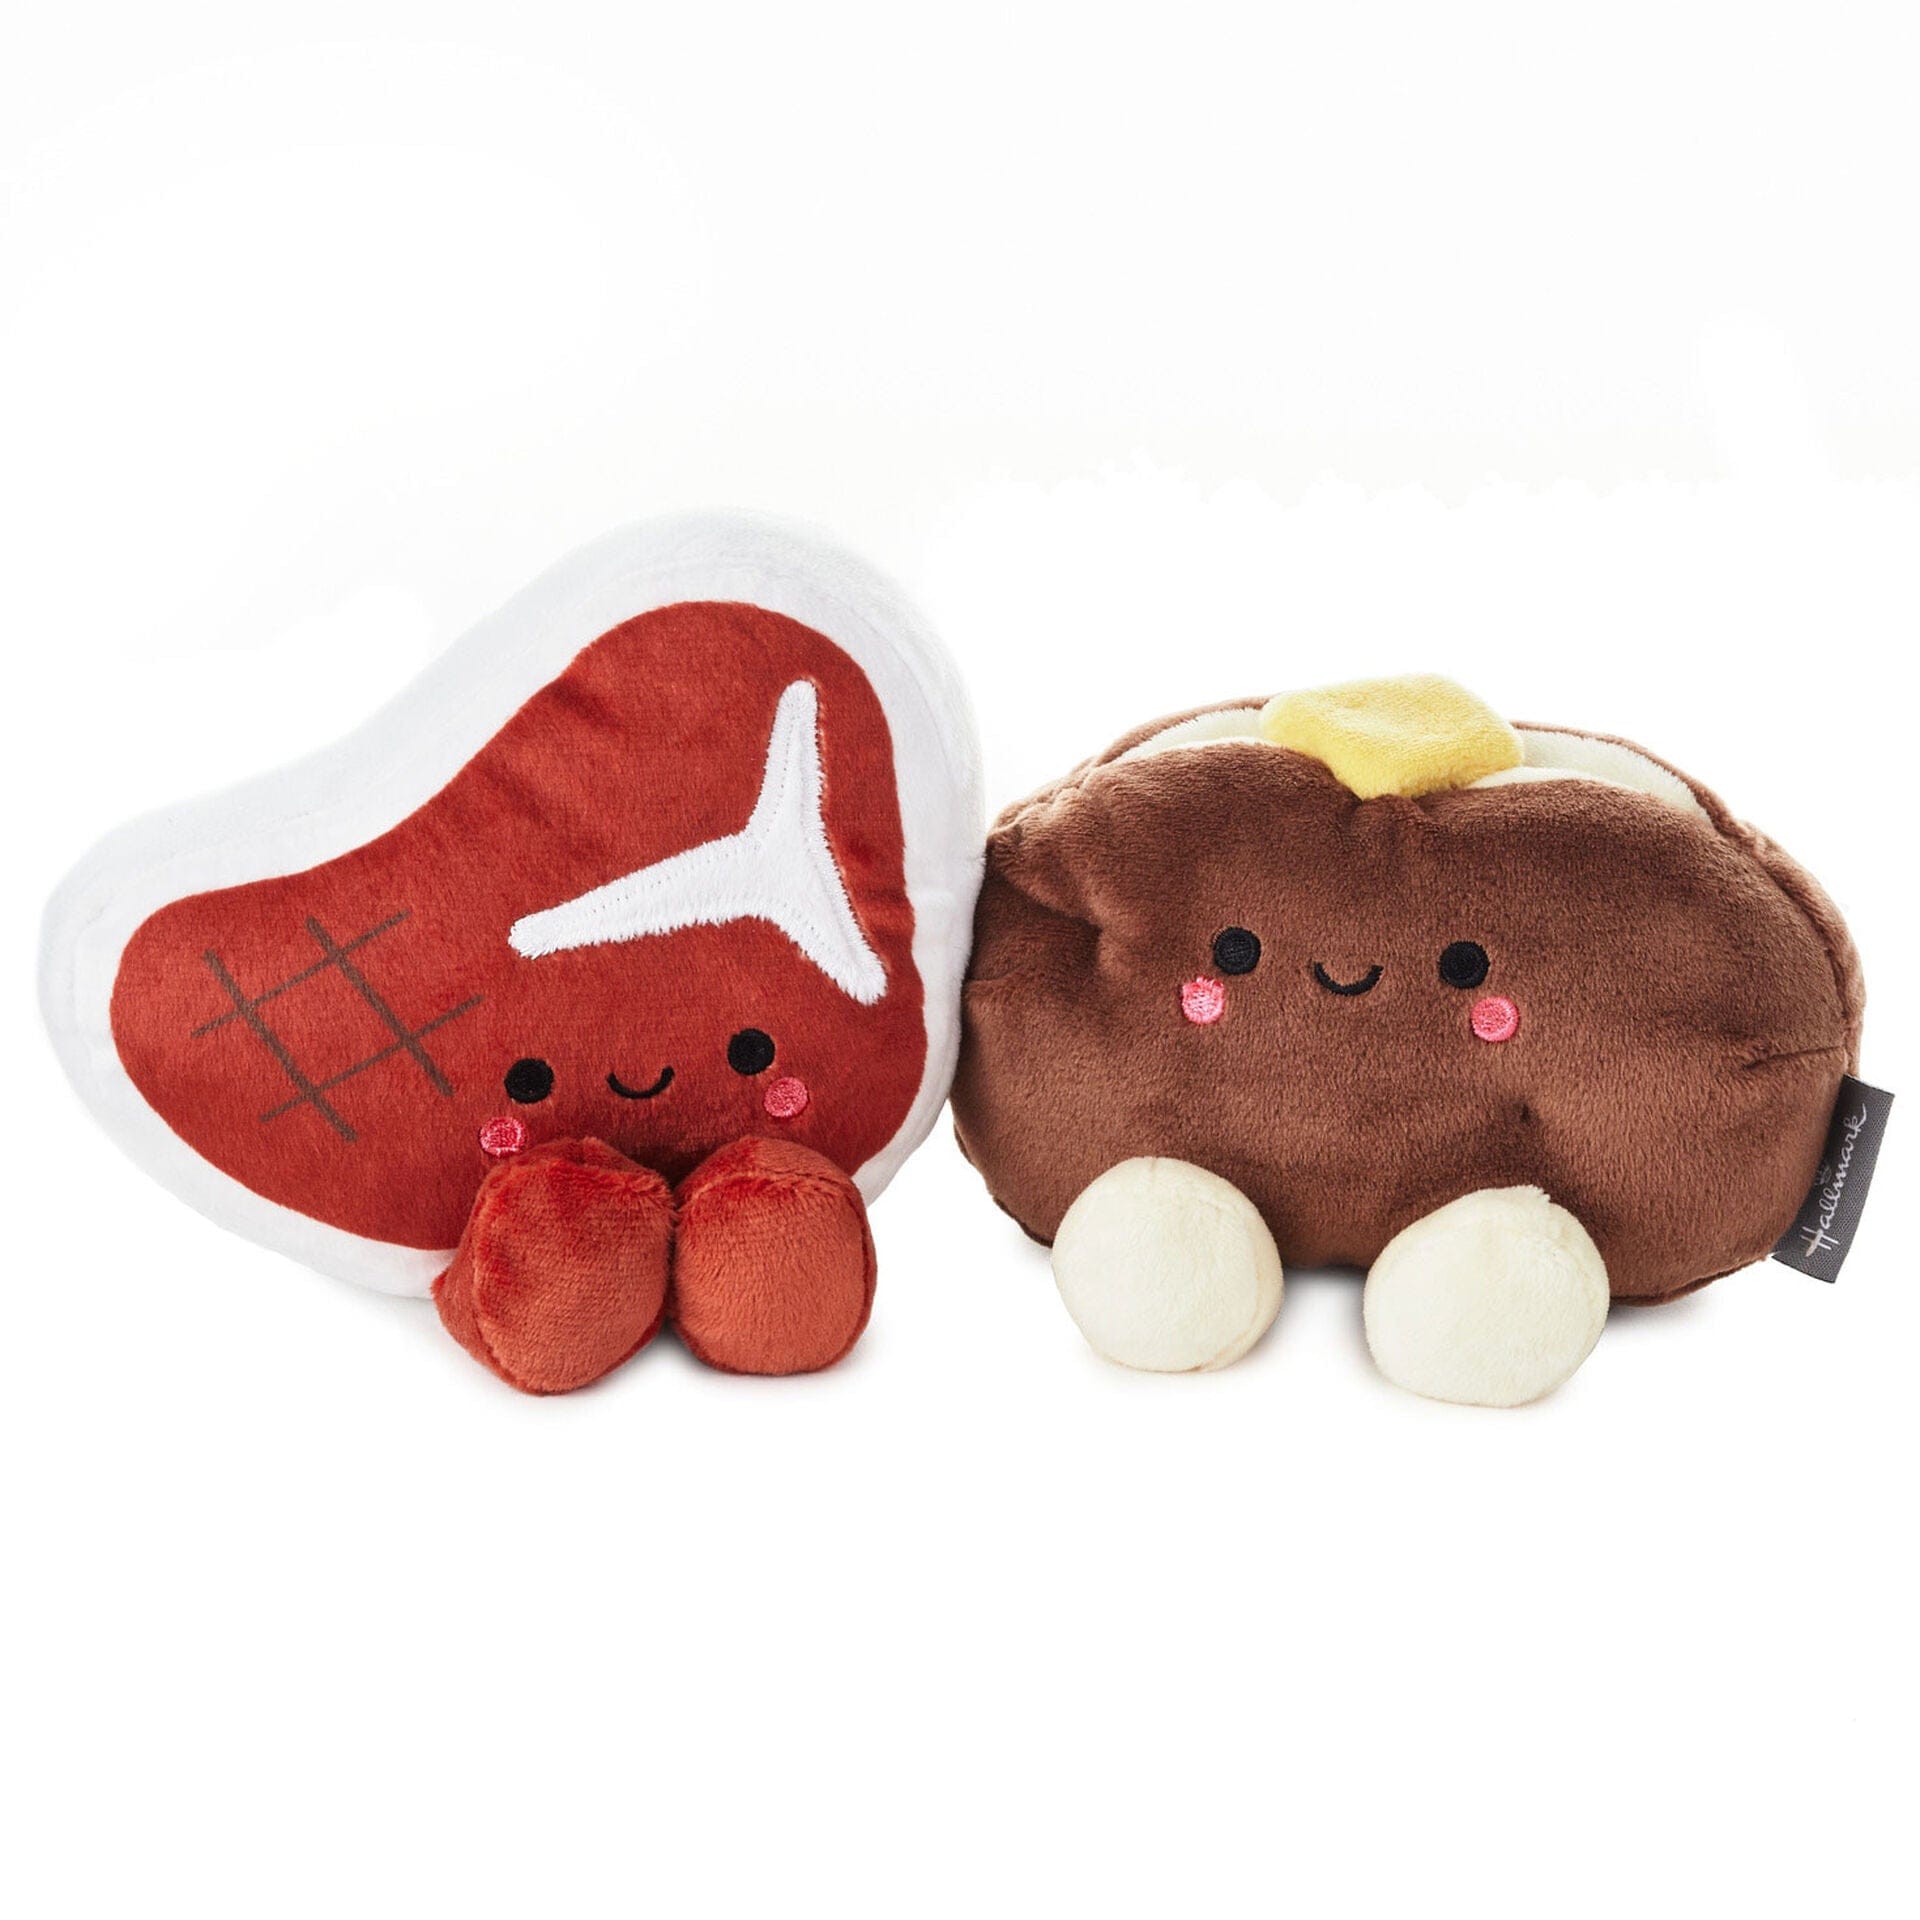 Better Together Steak and Potato Magnetic Plush